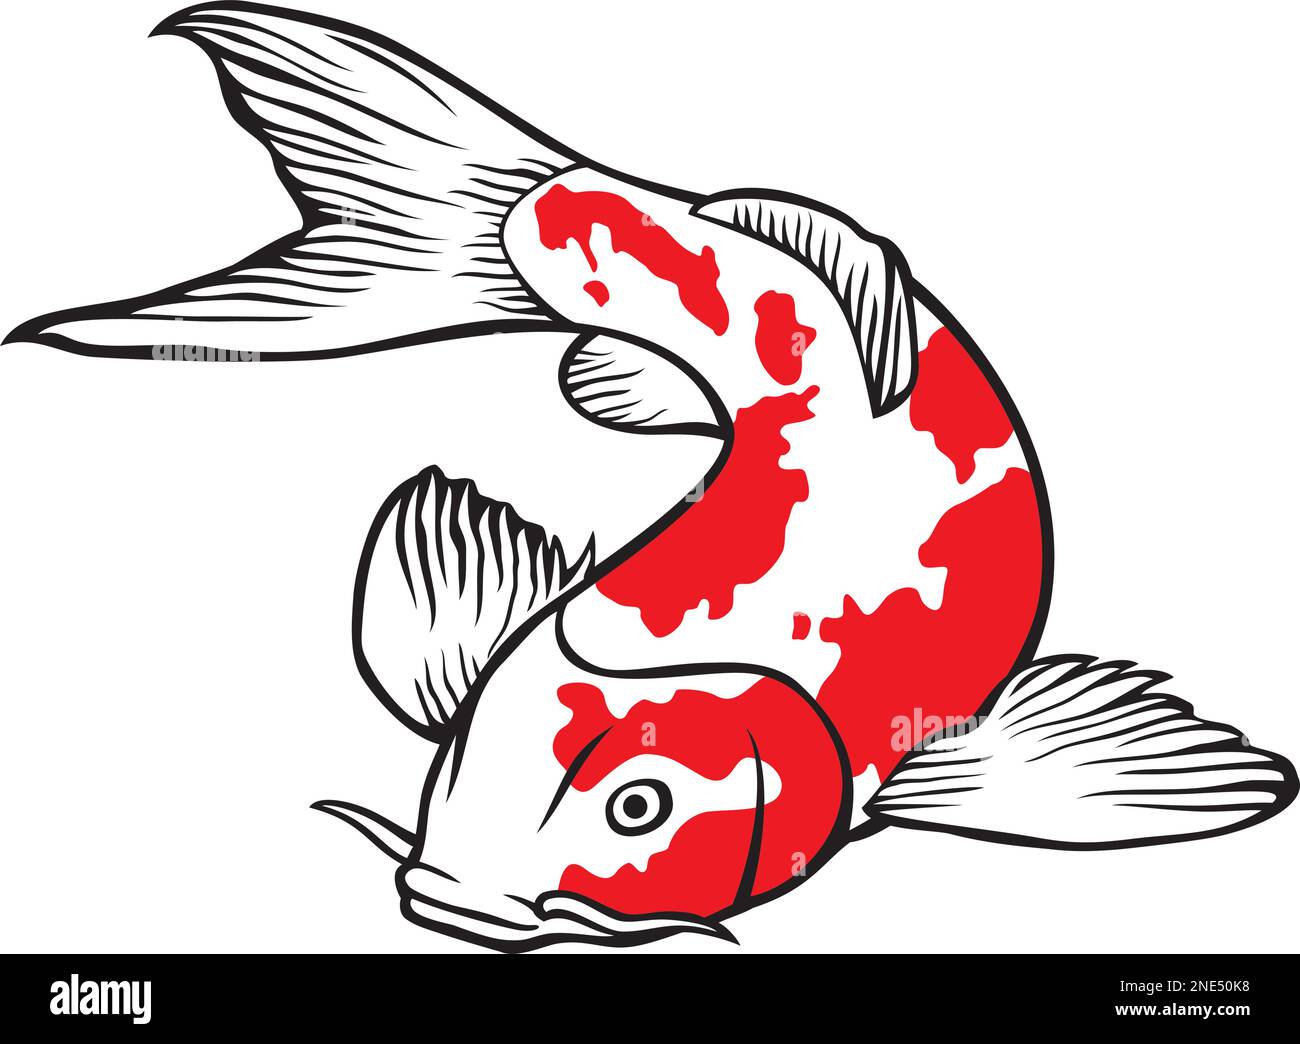 Vector illustration of a Japanese or Chinese inspired koi carp fish Stock Vector